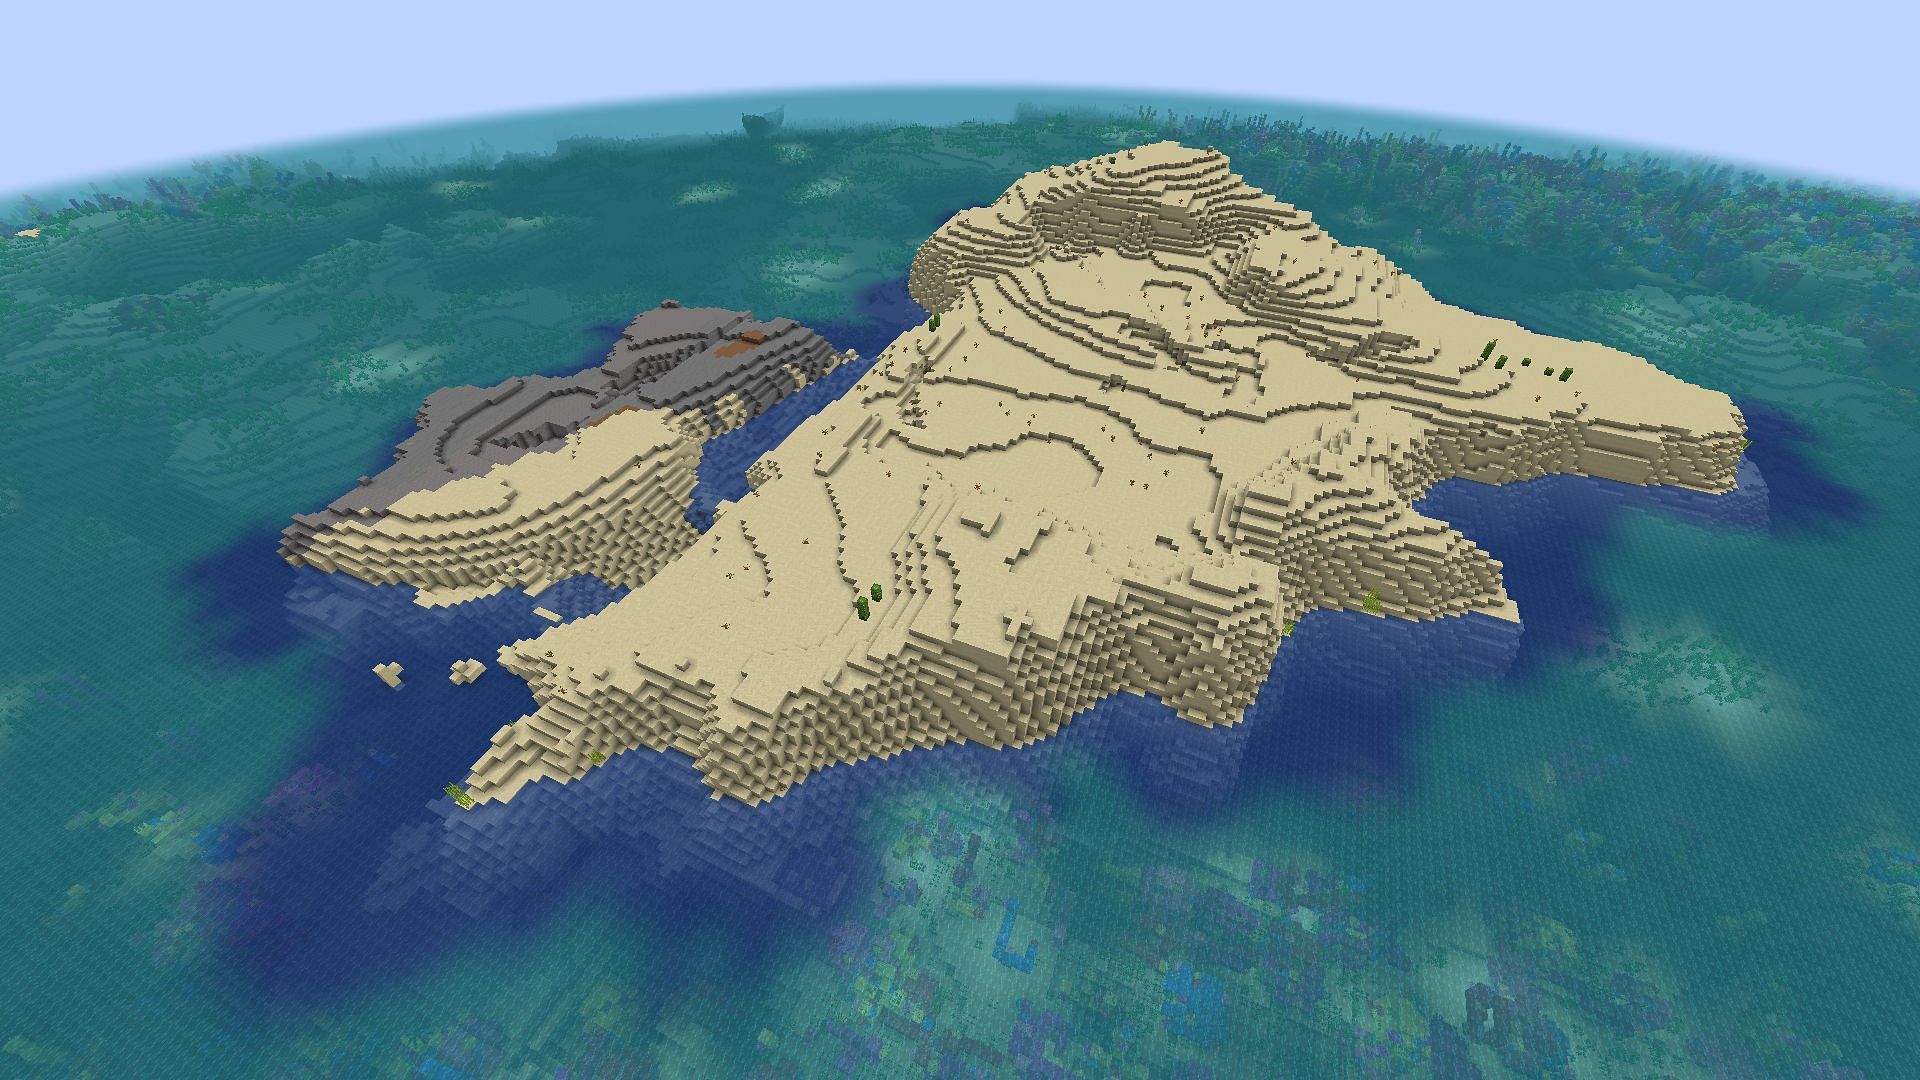 This heat-blasted island should be a tricky one to settle on in Minecraft (Image via Mojang)